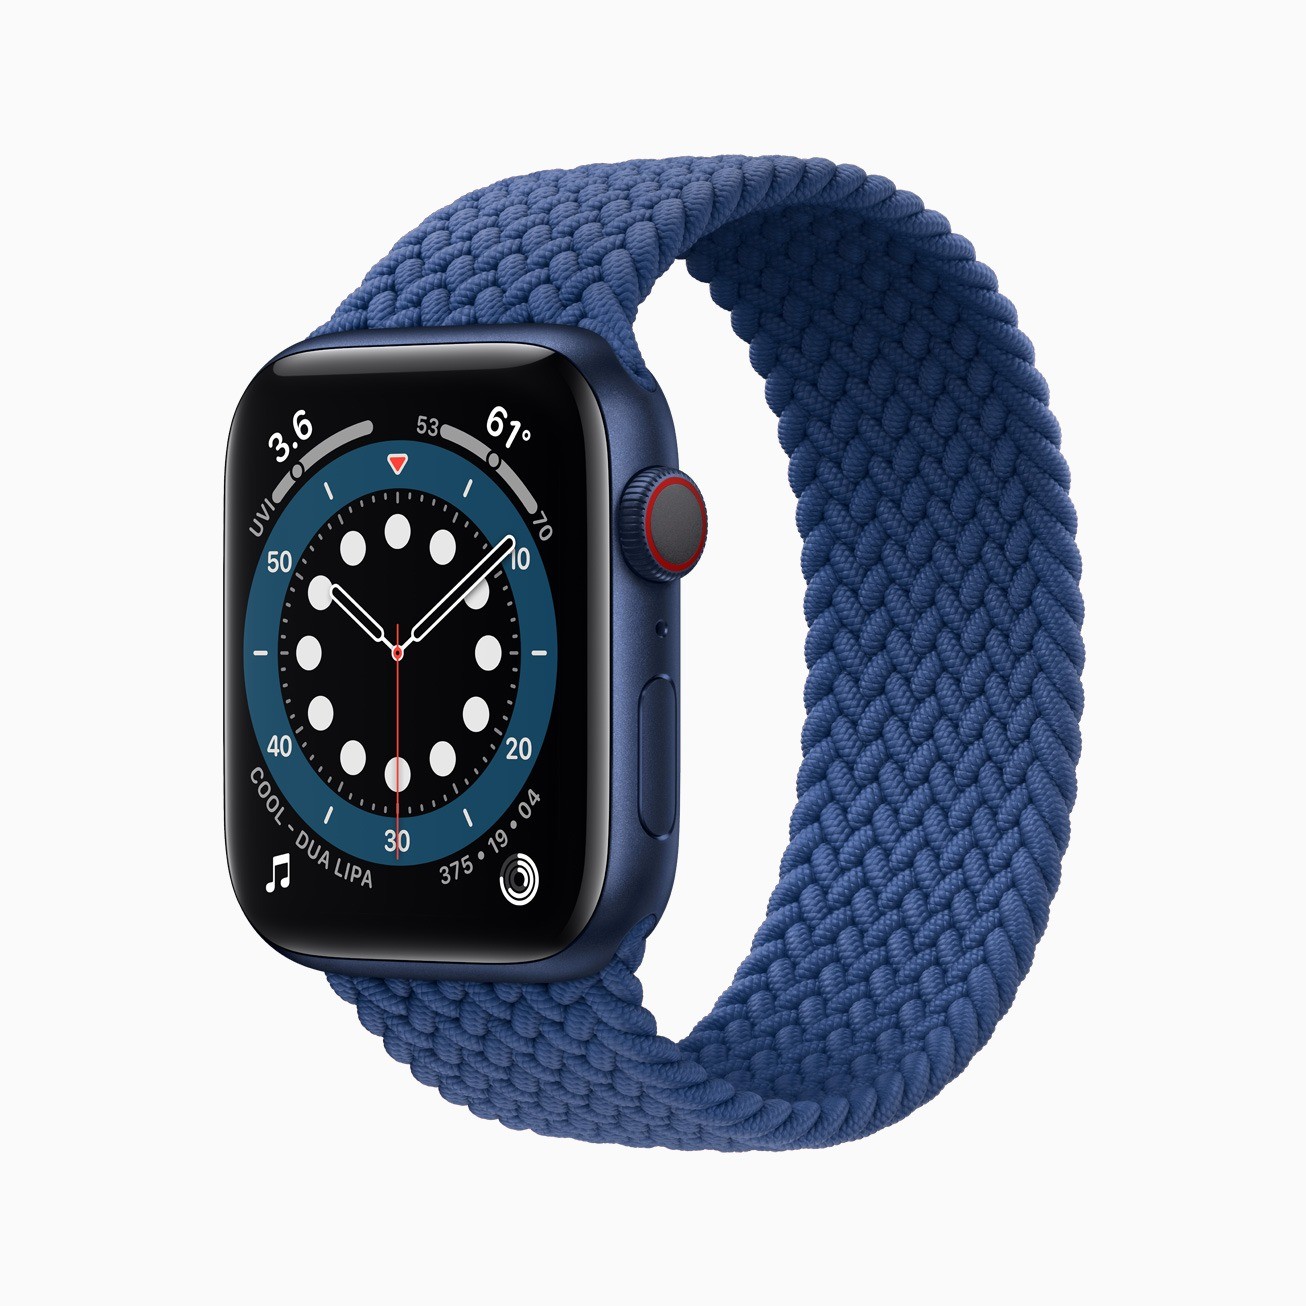 Apple watch series 7 to come with a massive battery upgrade 533358 2